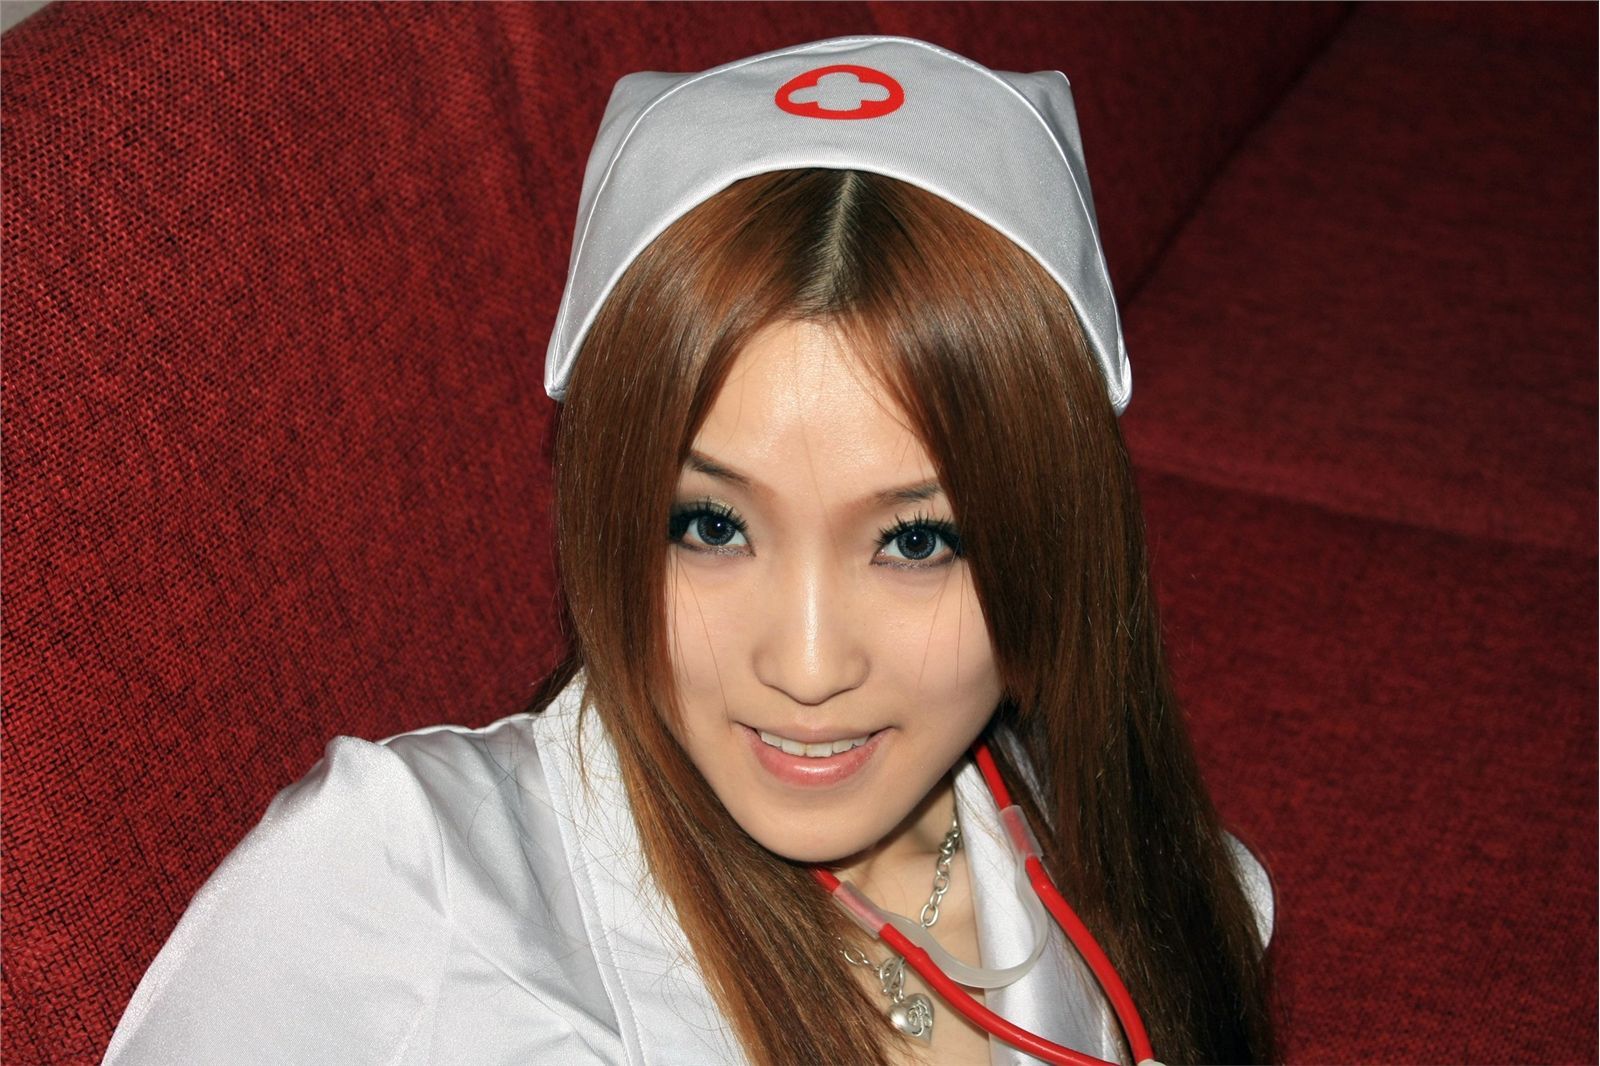 [online collection] Super sexy nurse sister on July 31, 2013